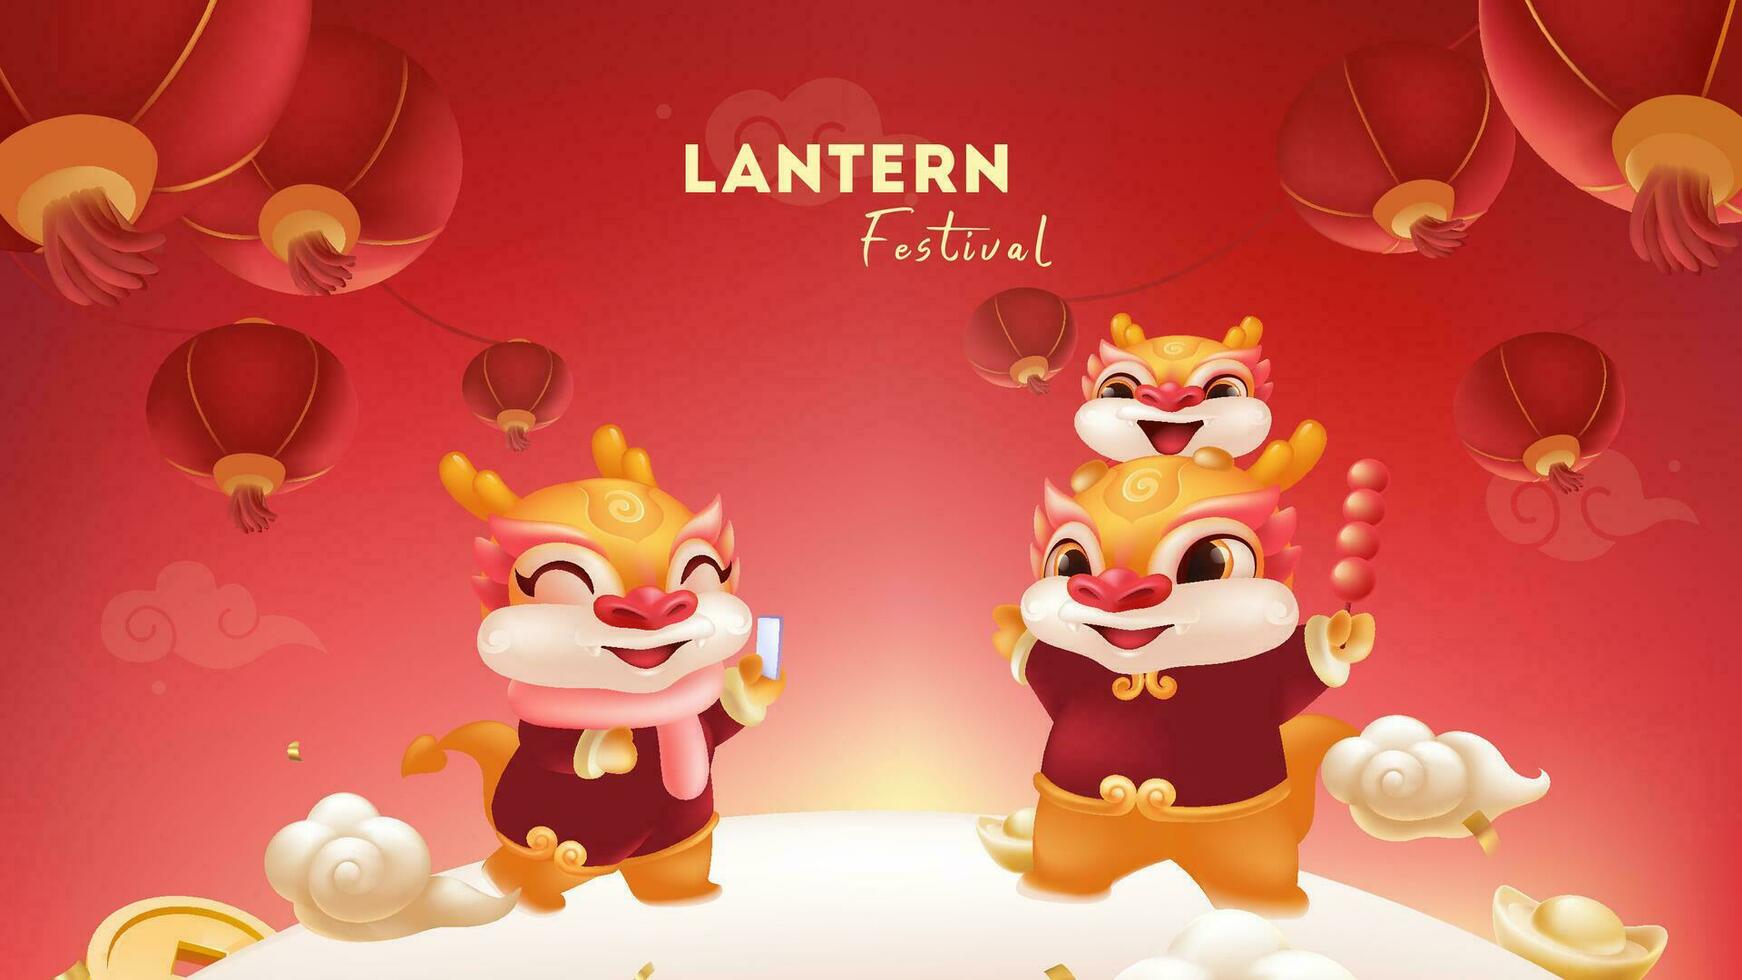 Lantern Festival background design lovely dragon family is visiting the lantern party vector